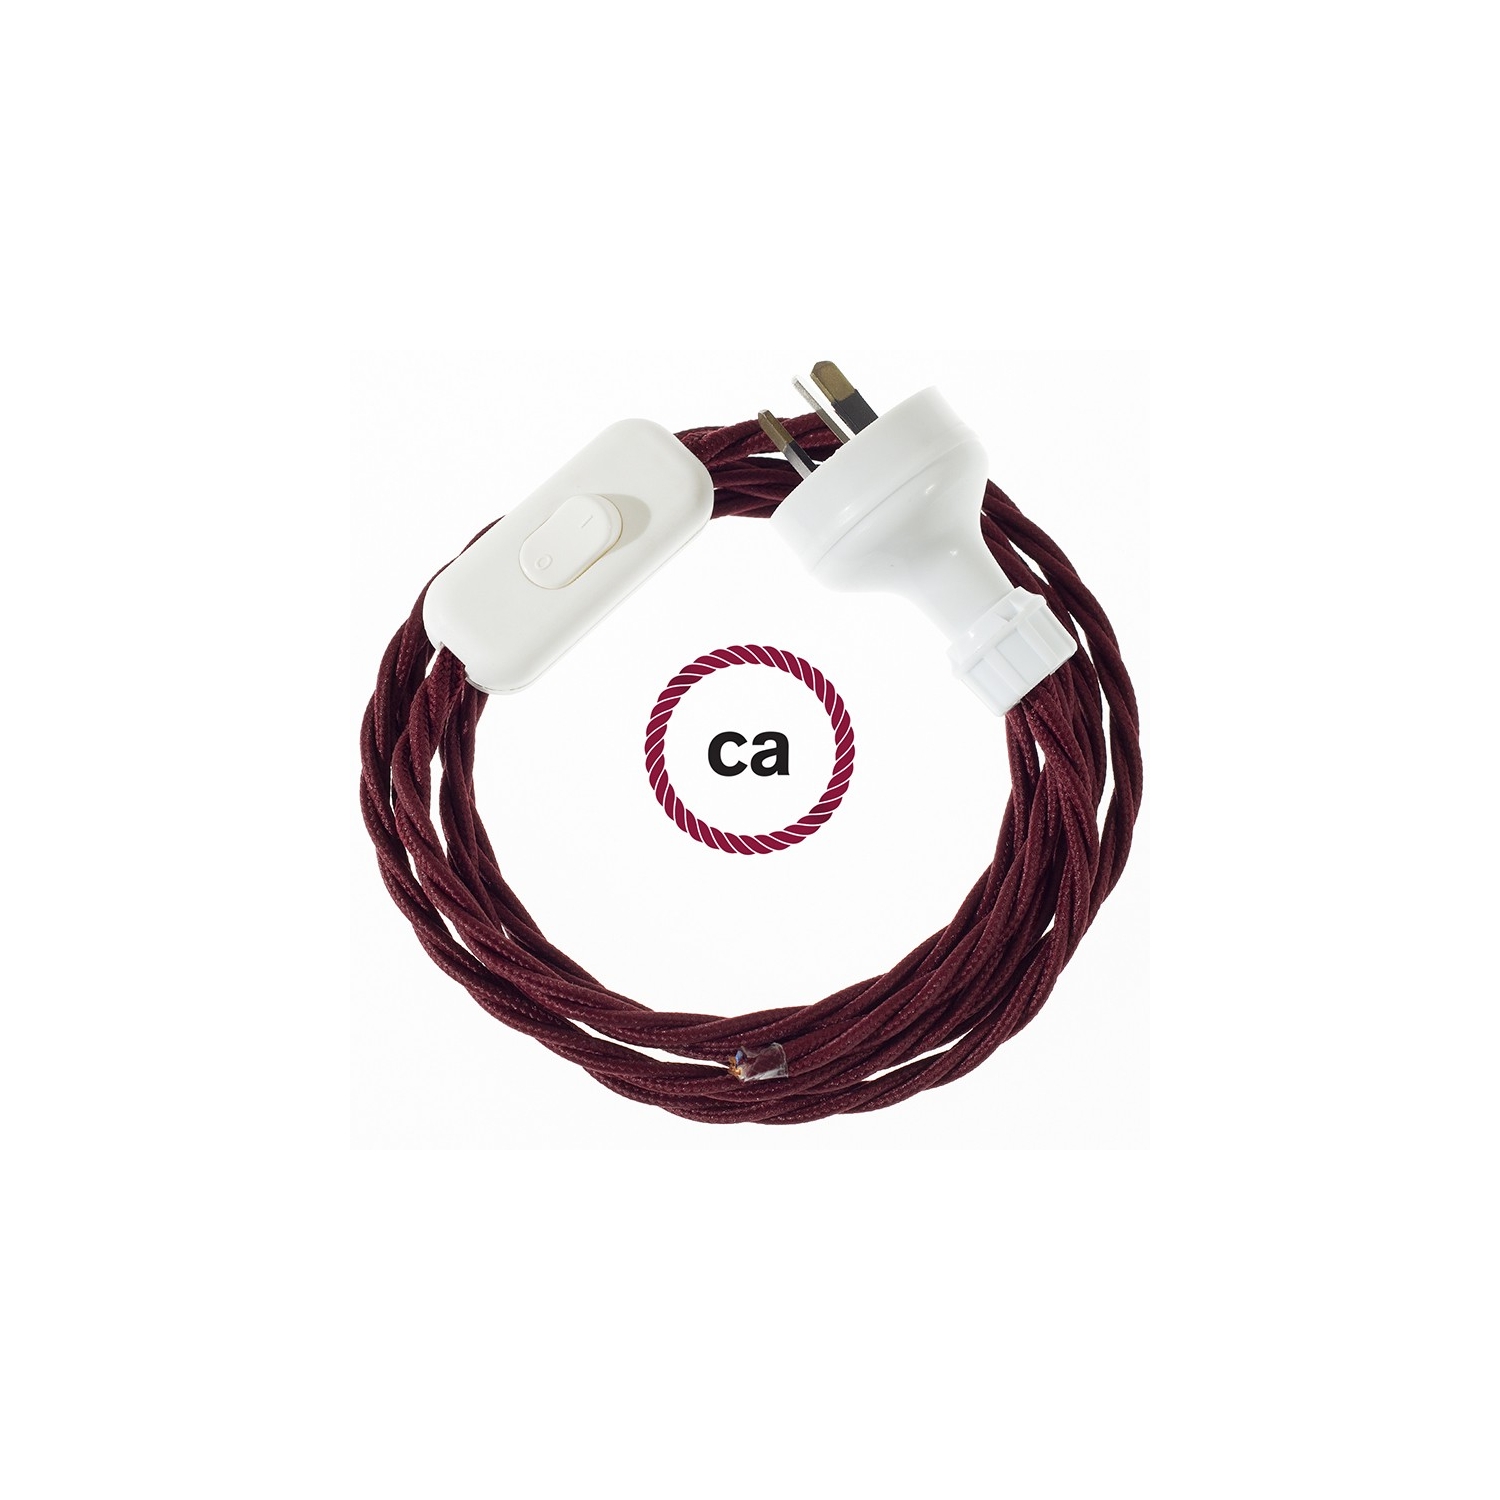 Wiring Burgundy Rayon textile cable TM19 - 1.80 mt